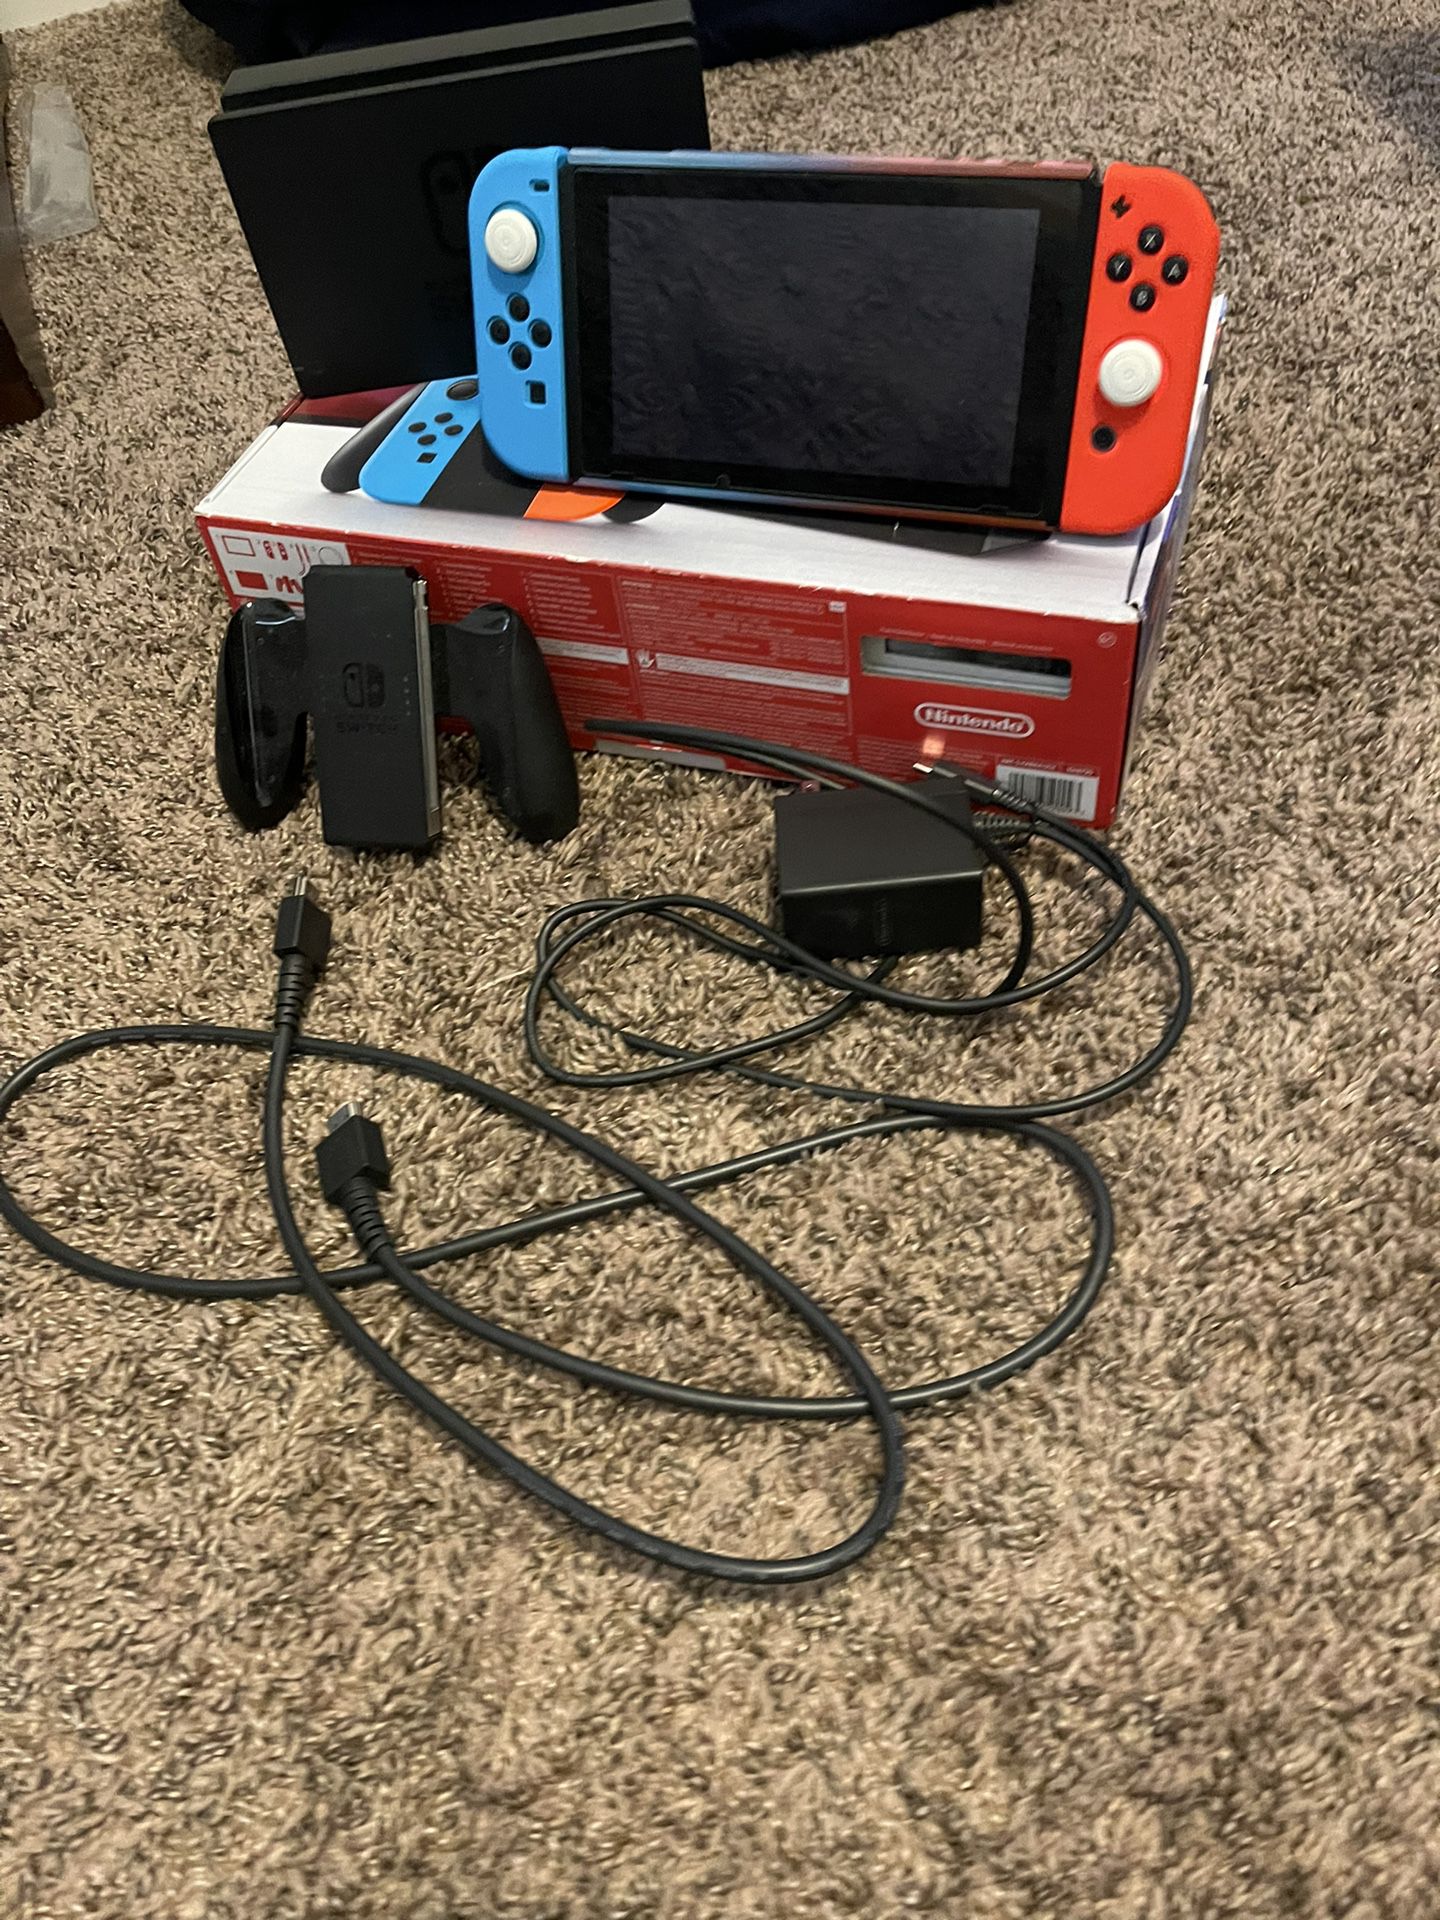 (Texas)Nintendo Switch Bundle With Free 128sd, Carrying Case, Bluetooth Adapet For Wireless Earpiece